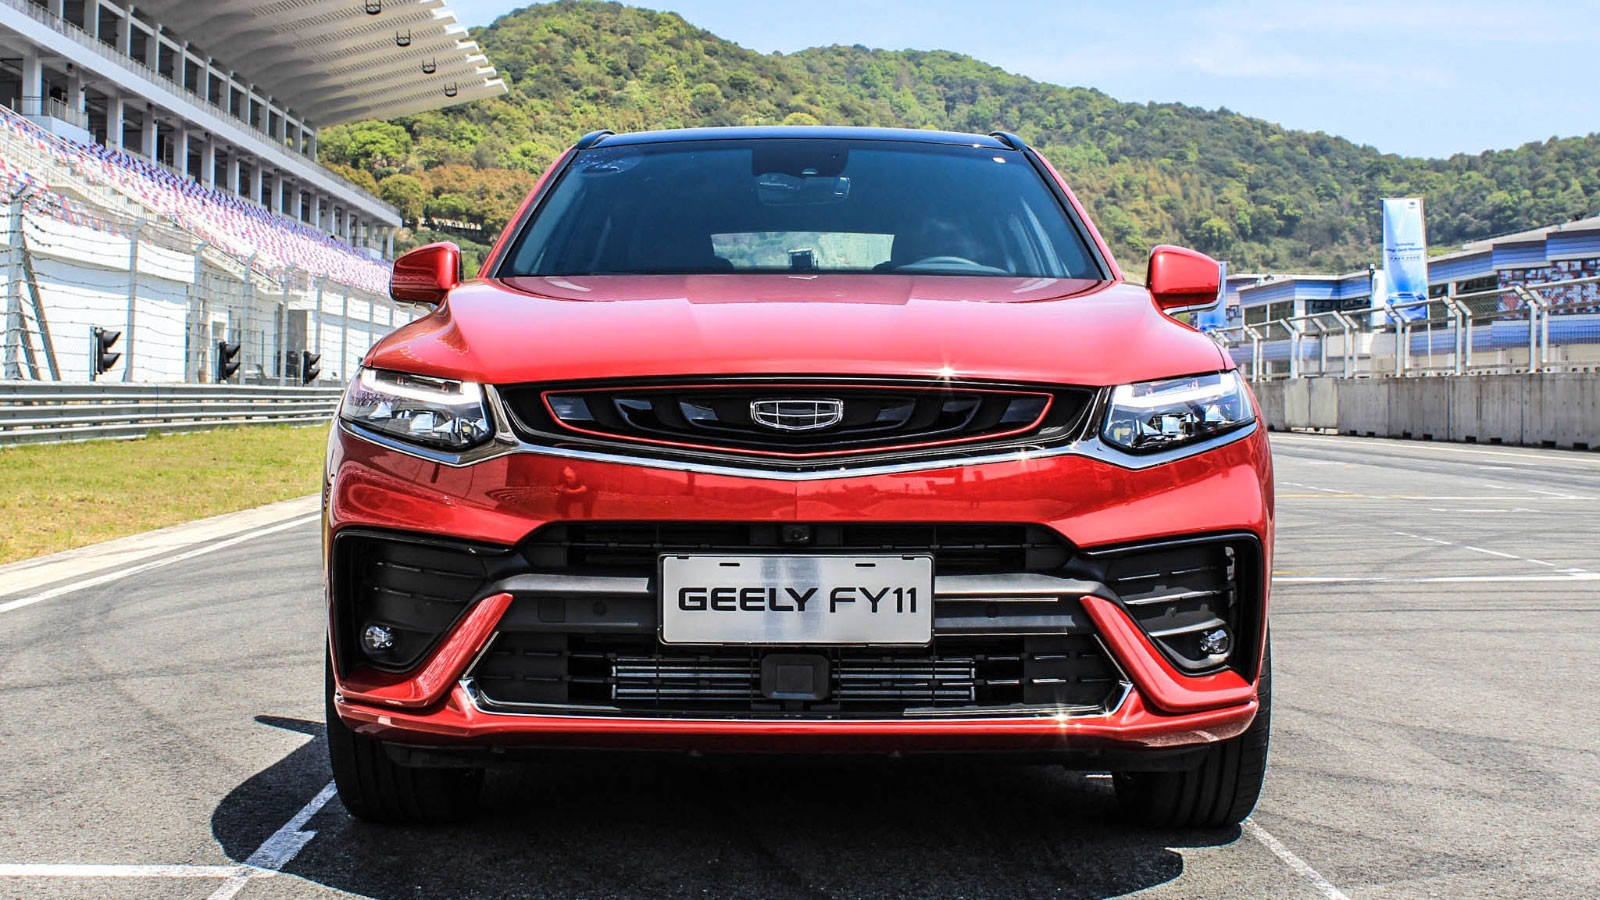 Geely fy11